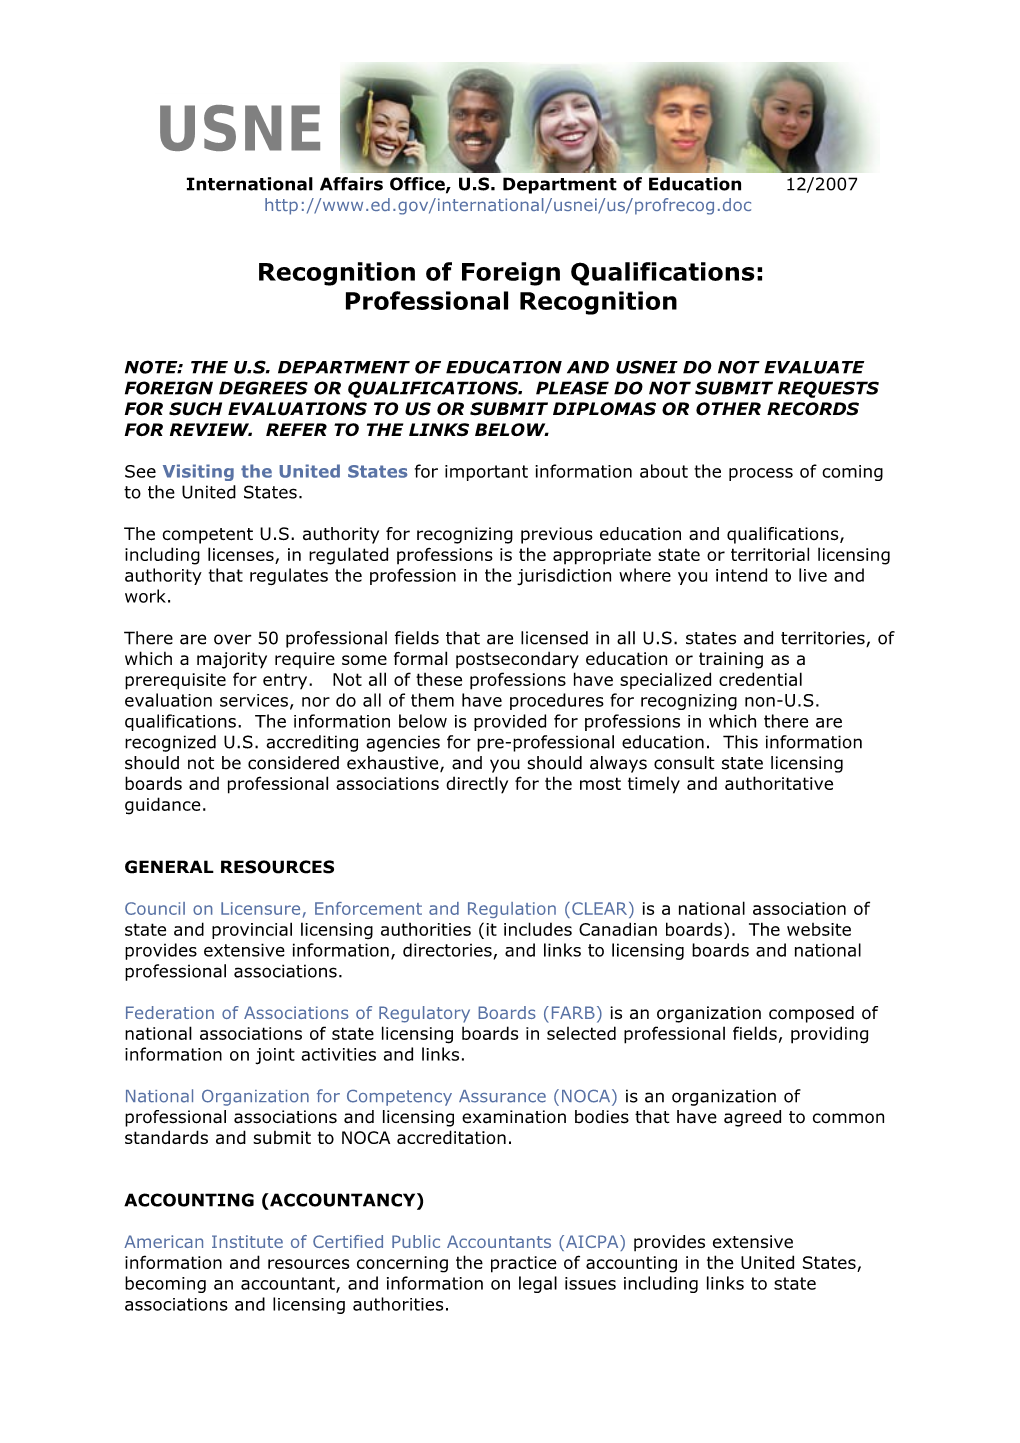 Recognition of Foreign Qualifications: Professional Recognition (MS Word)